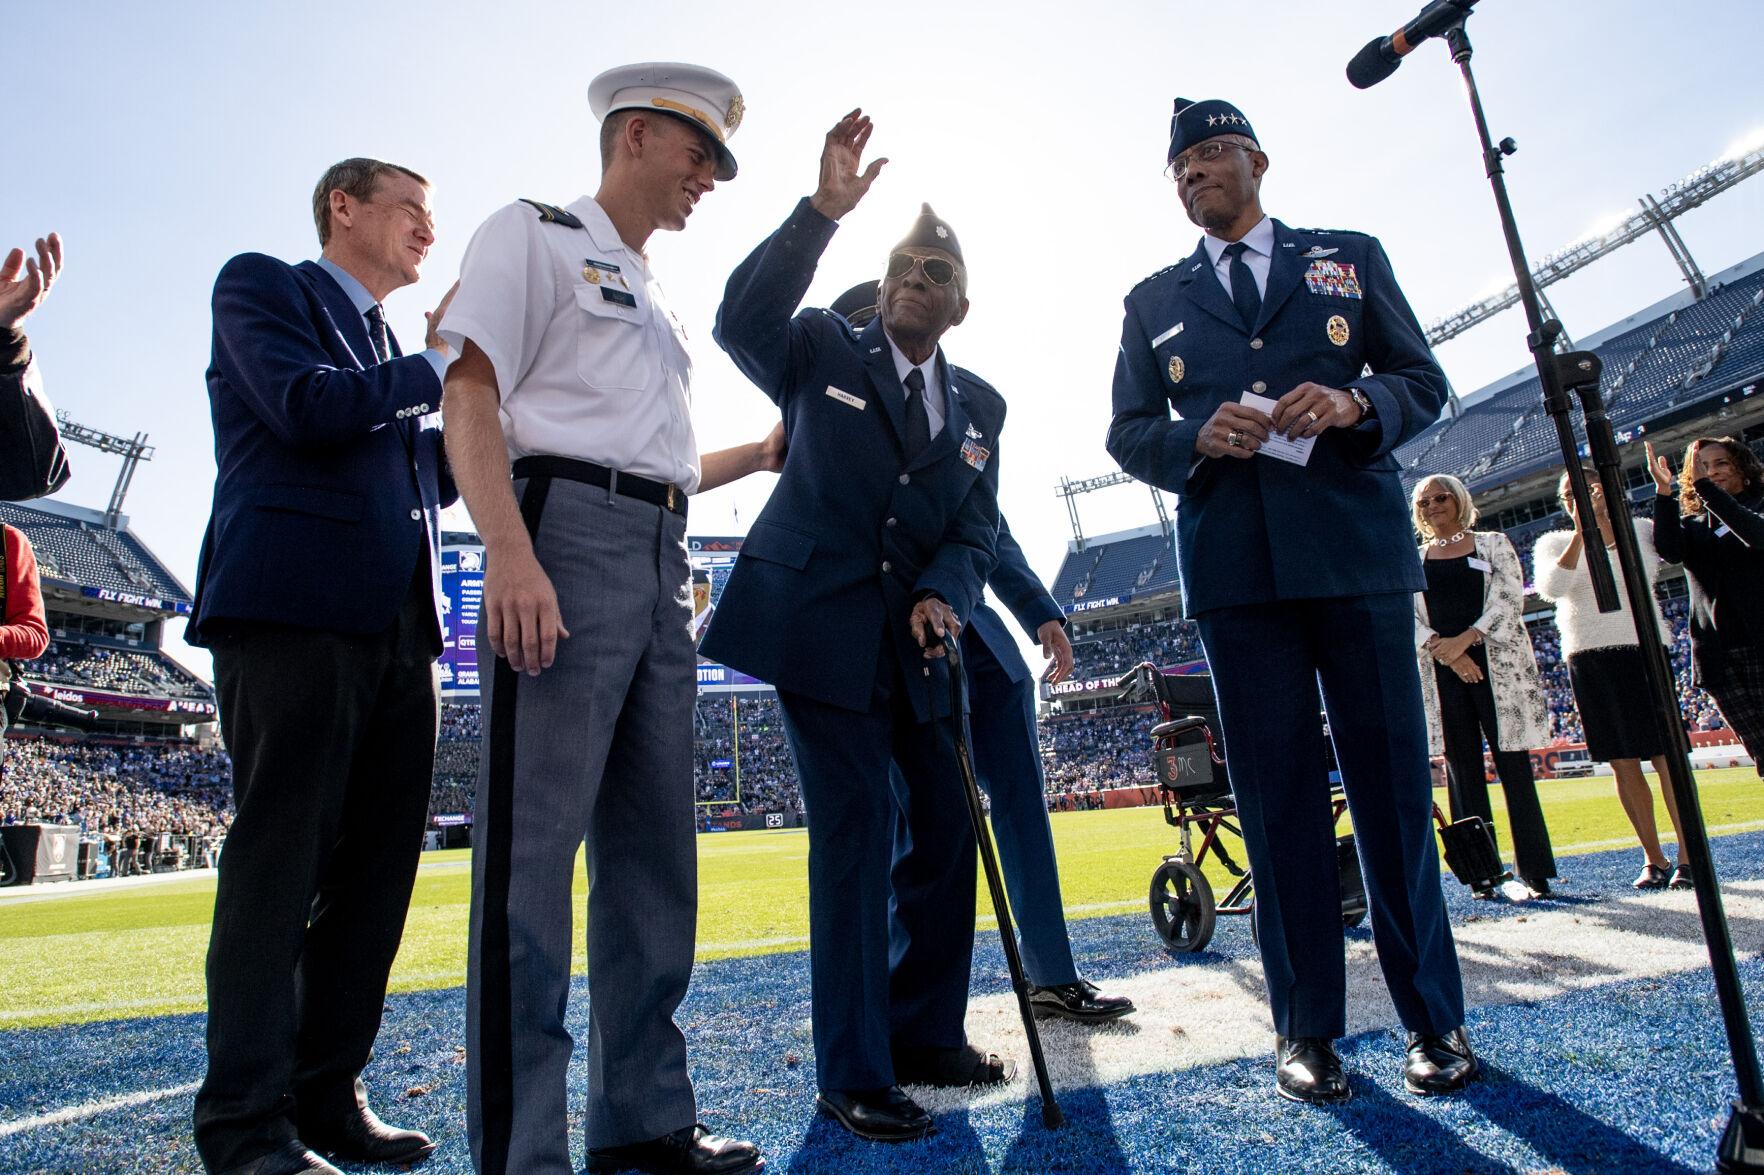 Tuskegee Airman honored at Army vs. Air Force game Military